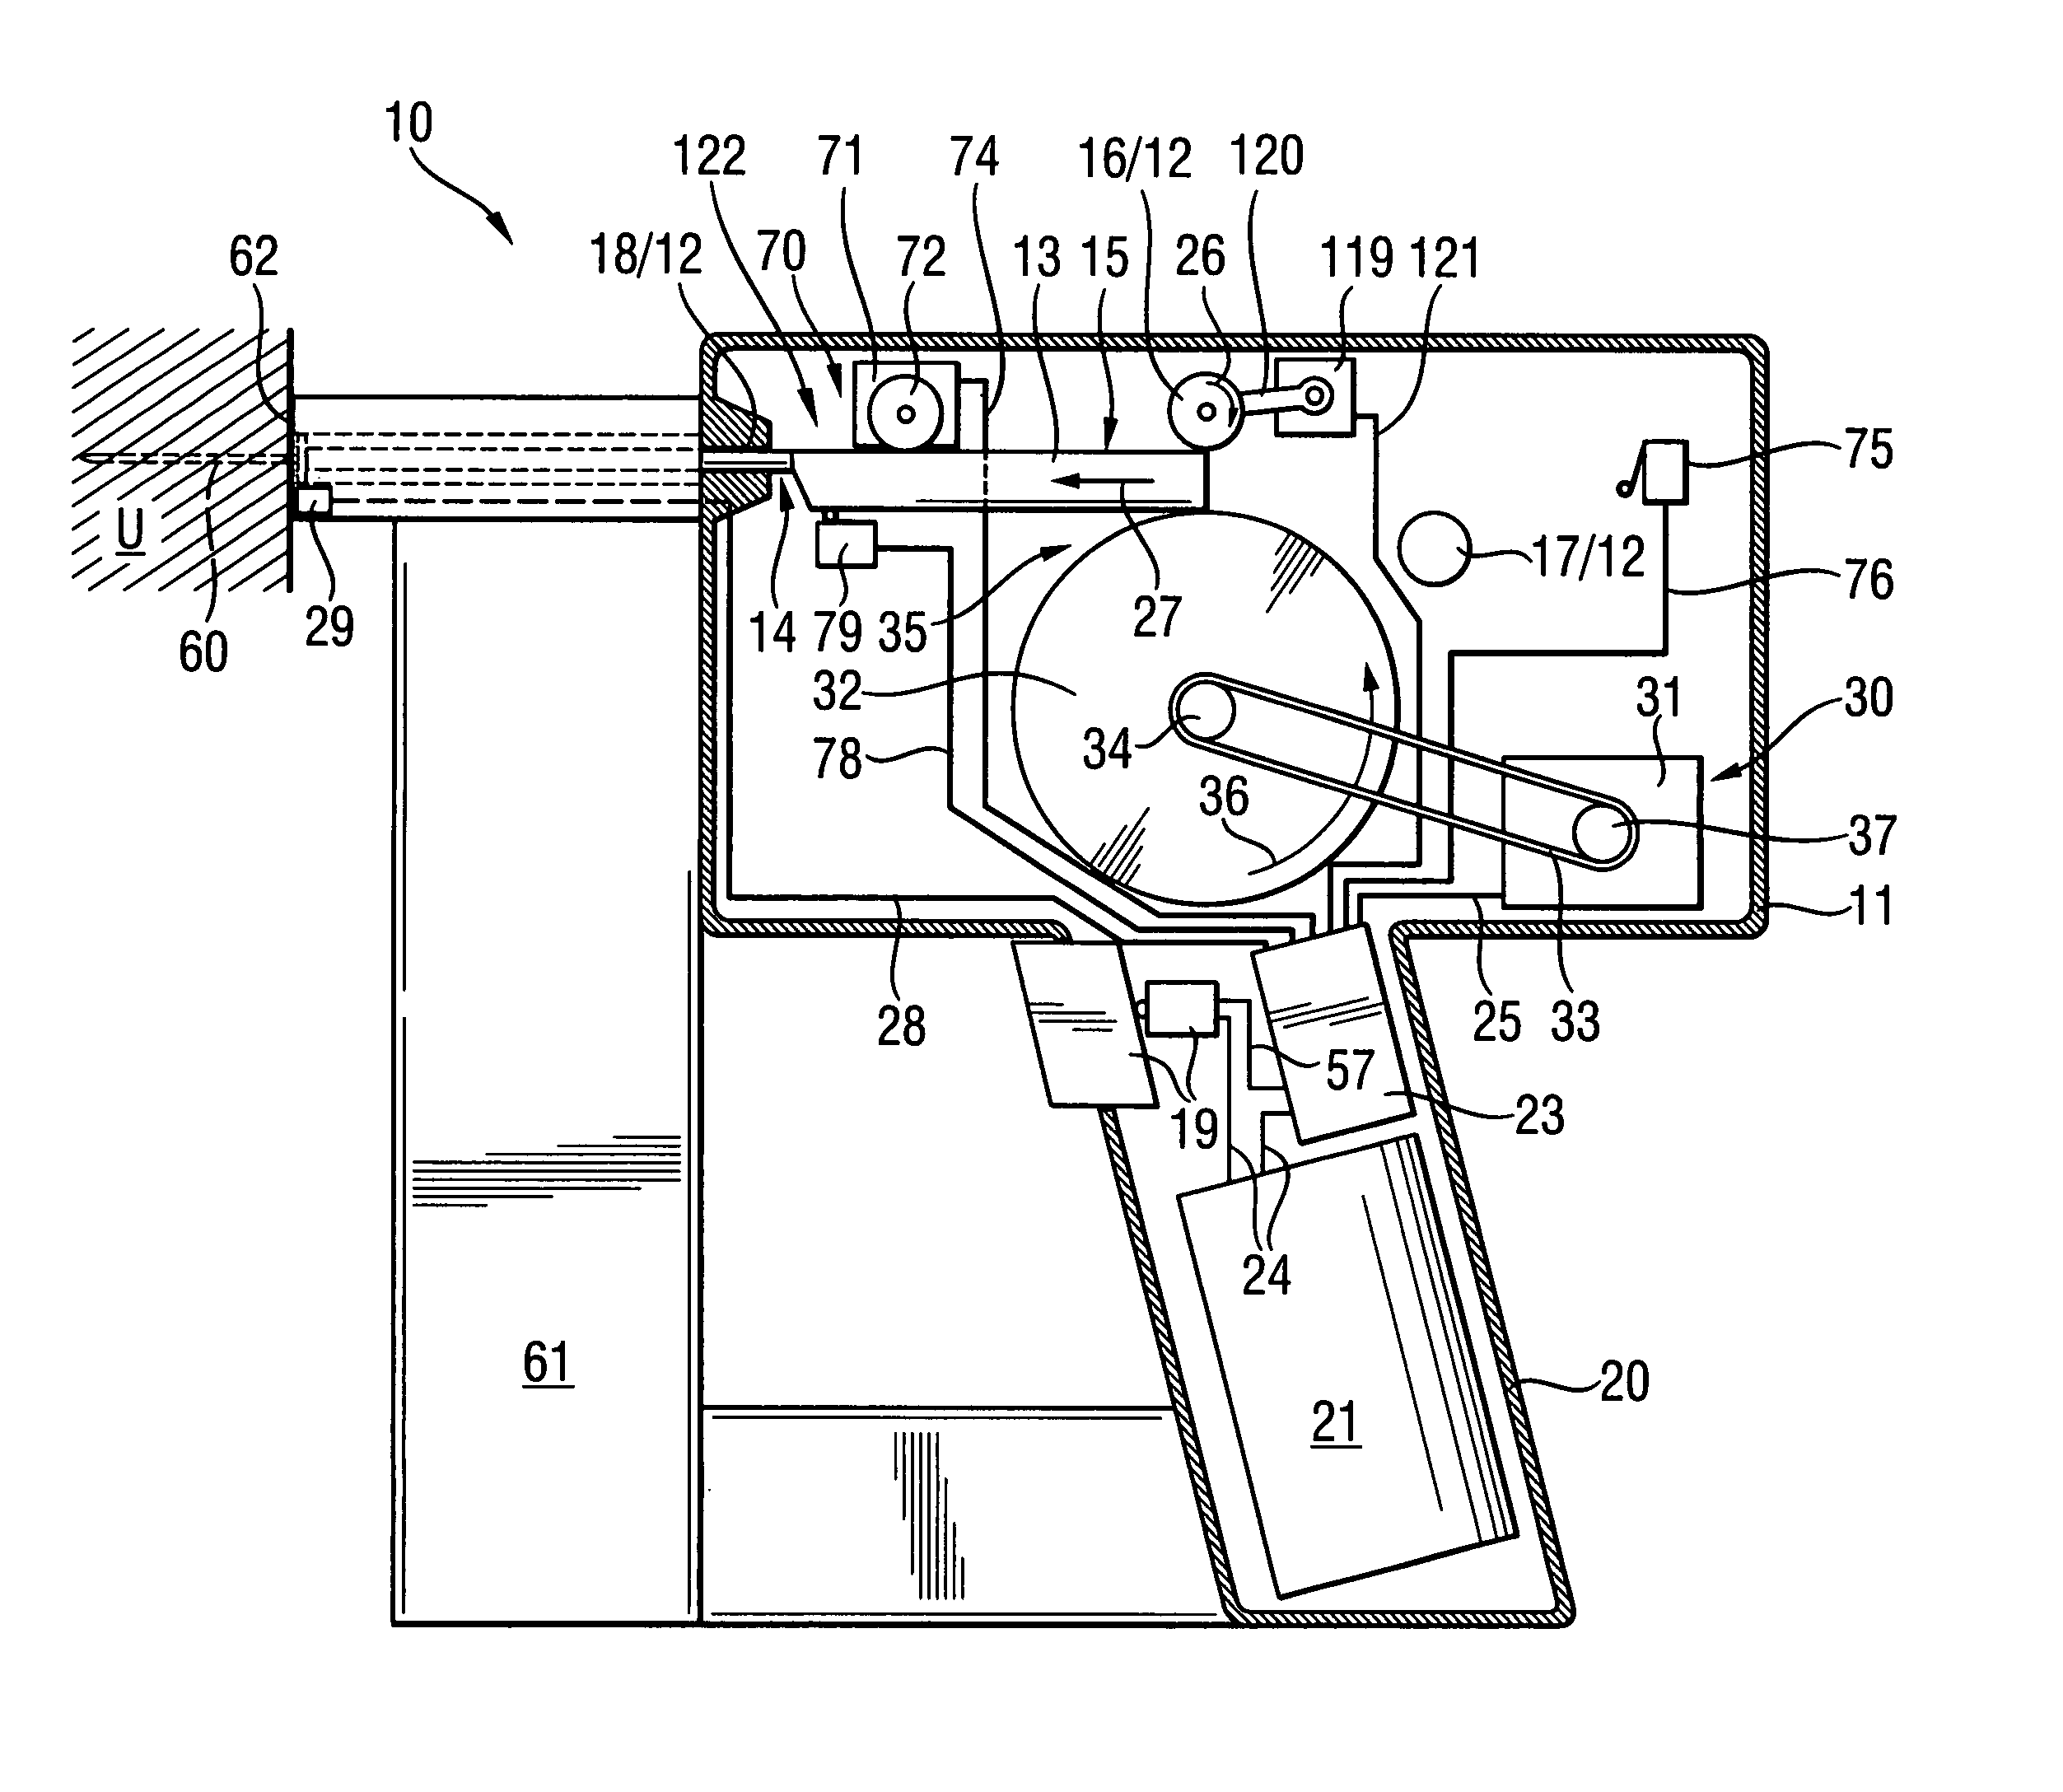 Electrically operated drive-in tool